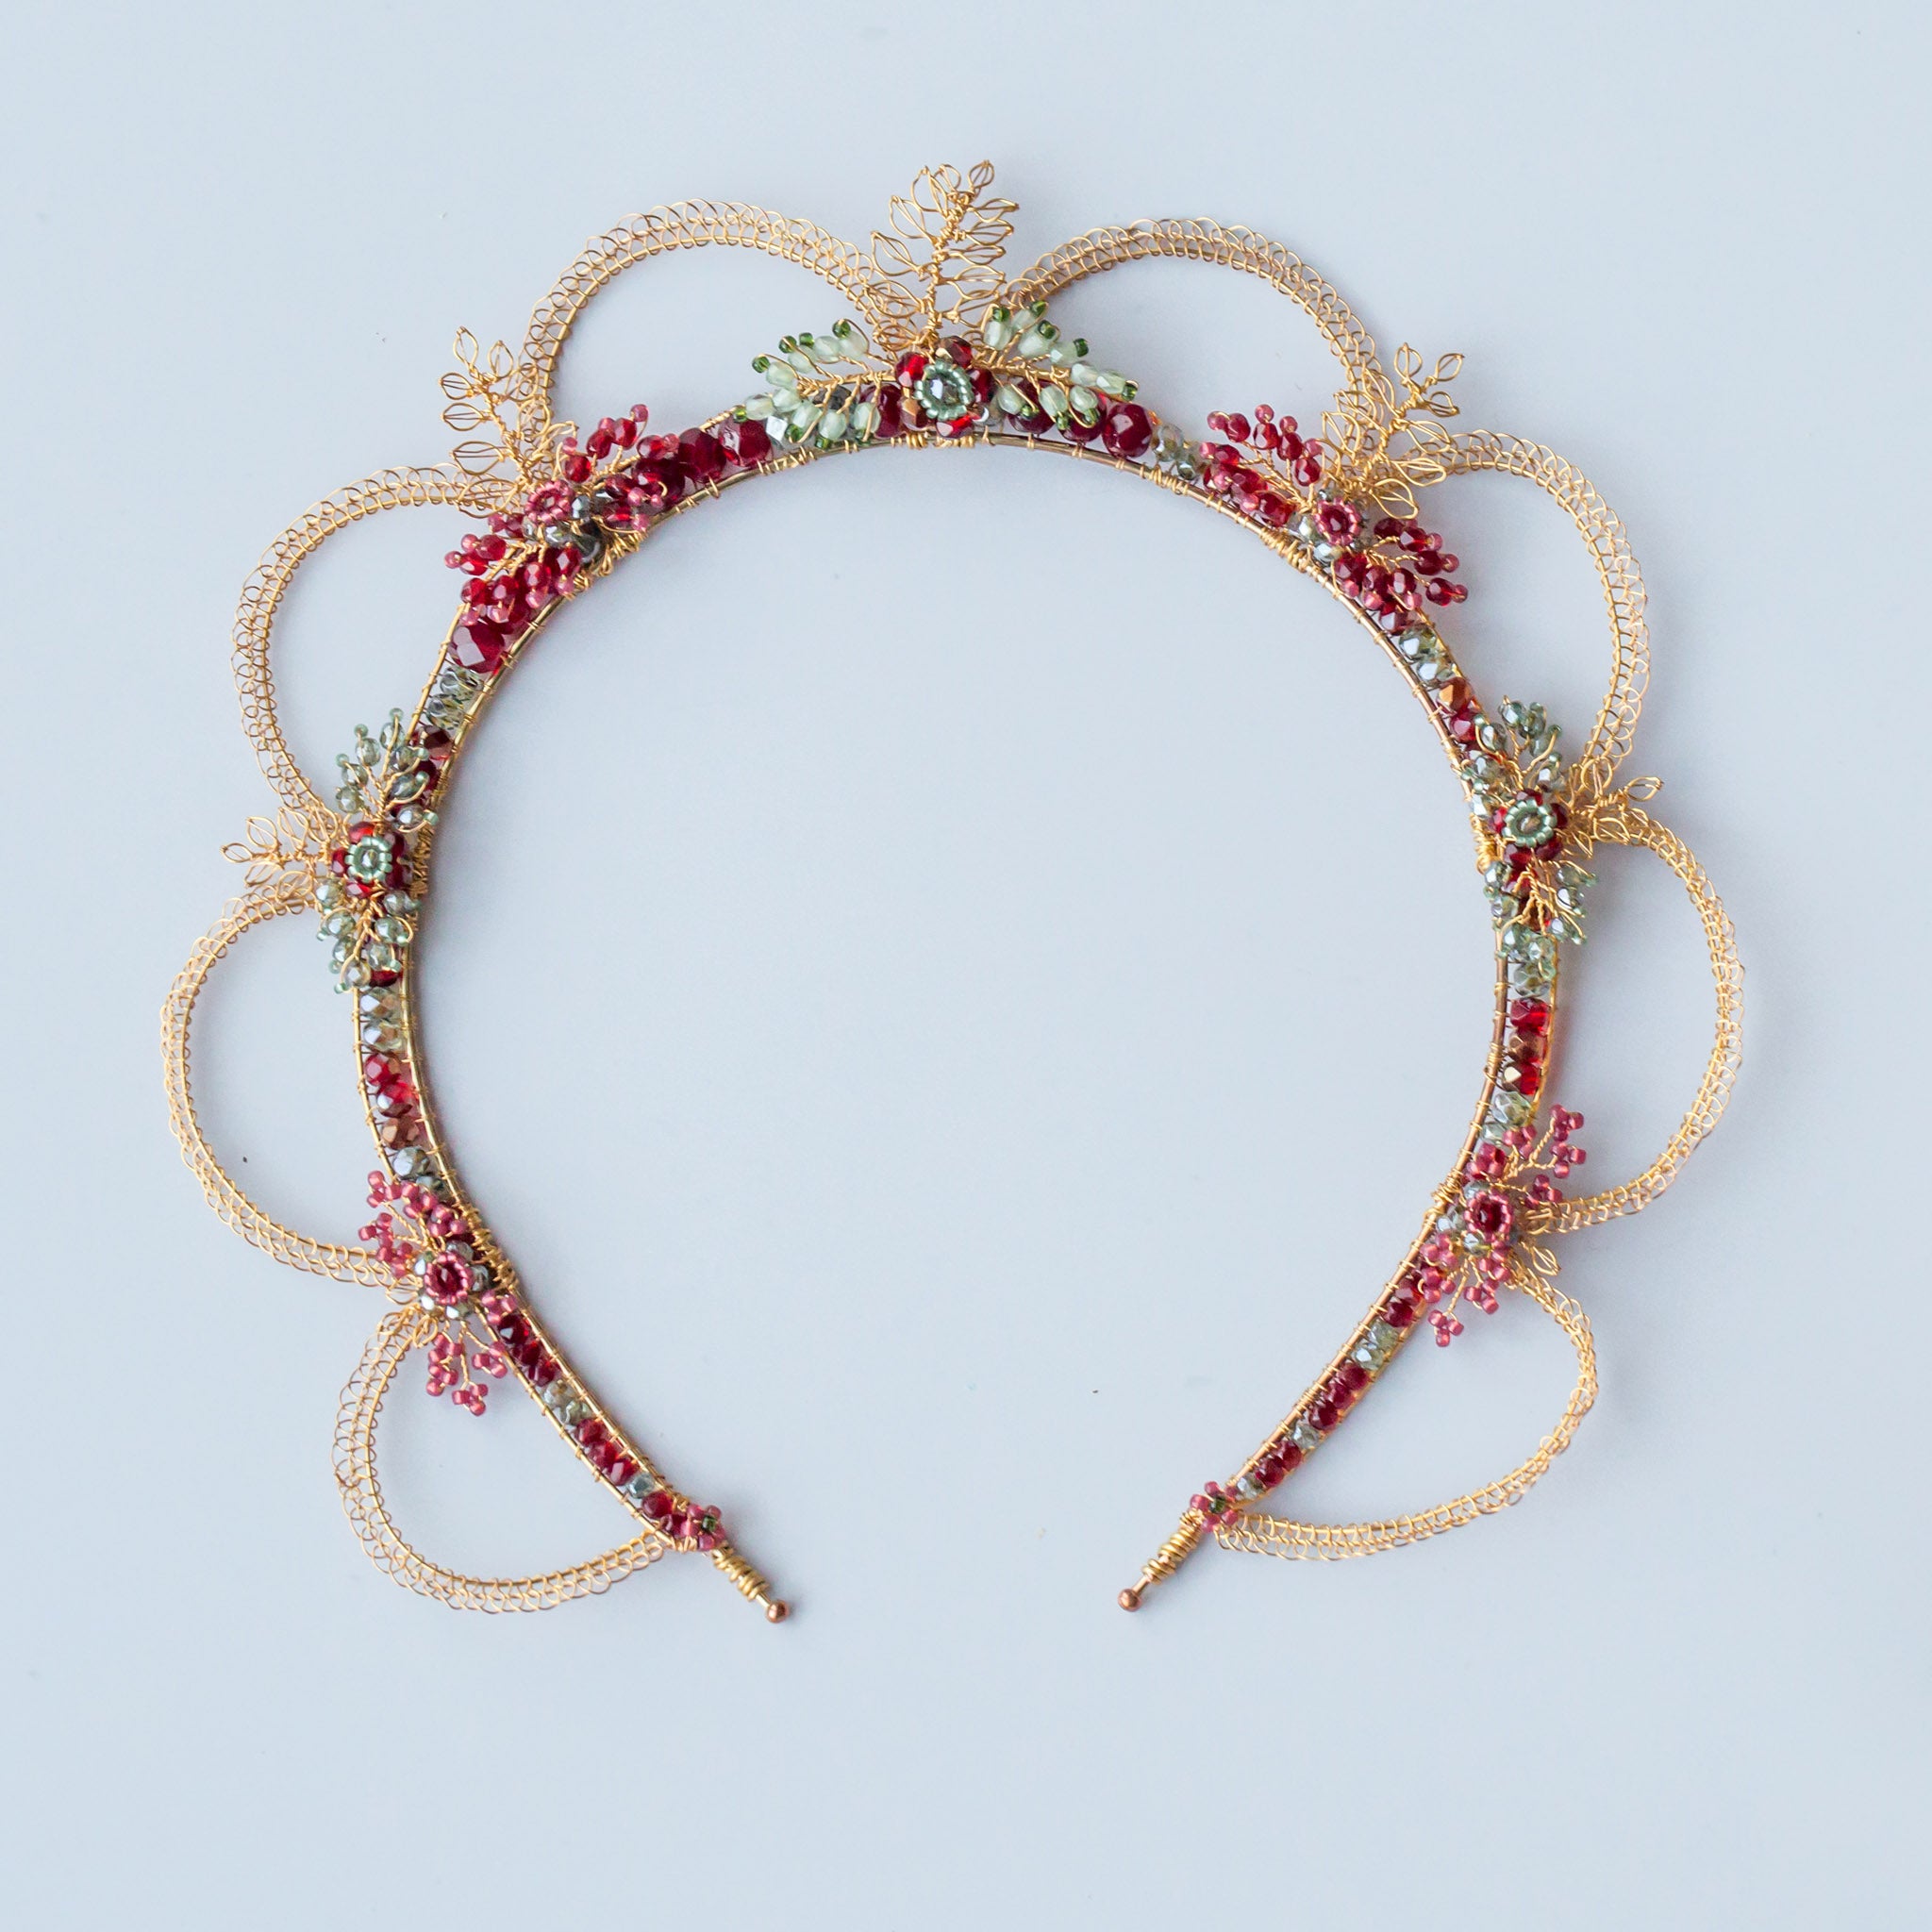 Oriana statement wedding crown in gold with handmade wire leaves, beaded flowers by Judith Brown Bridal